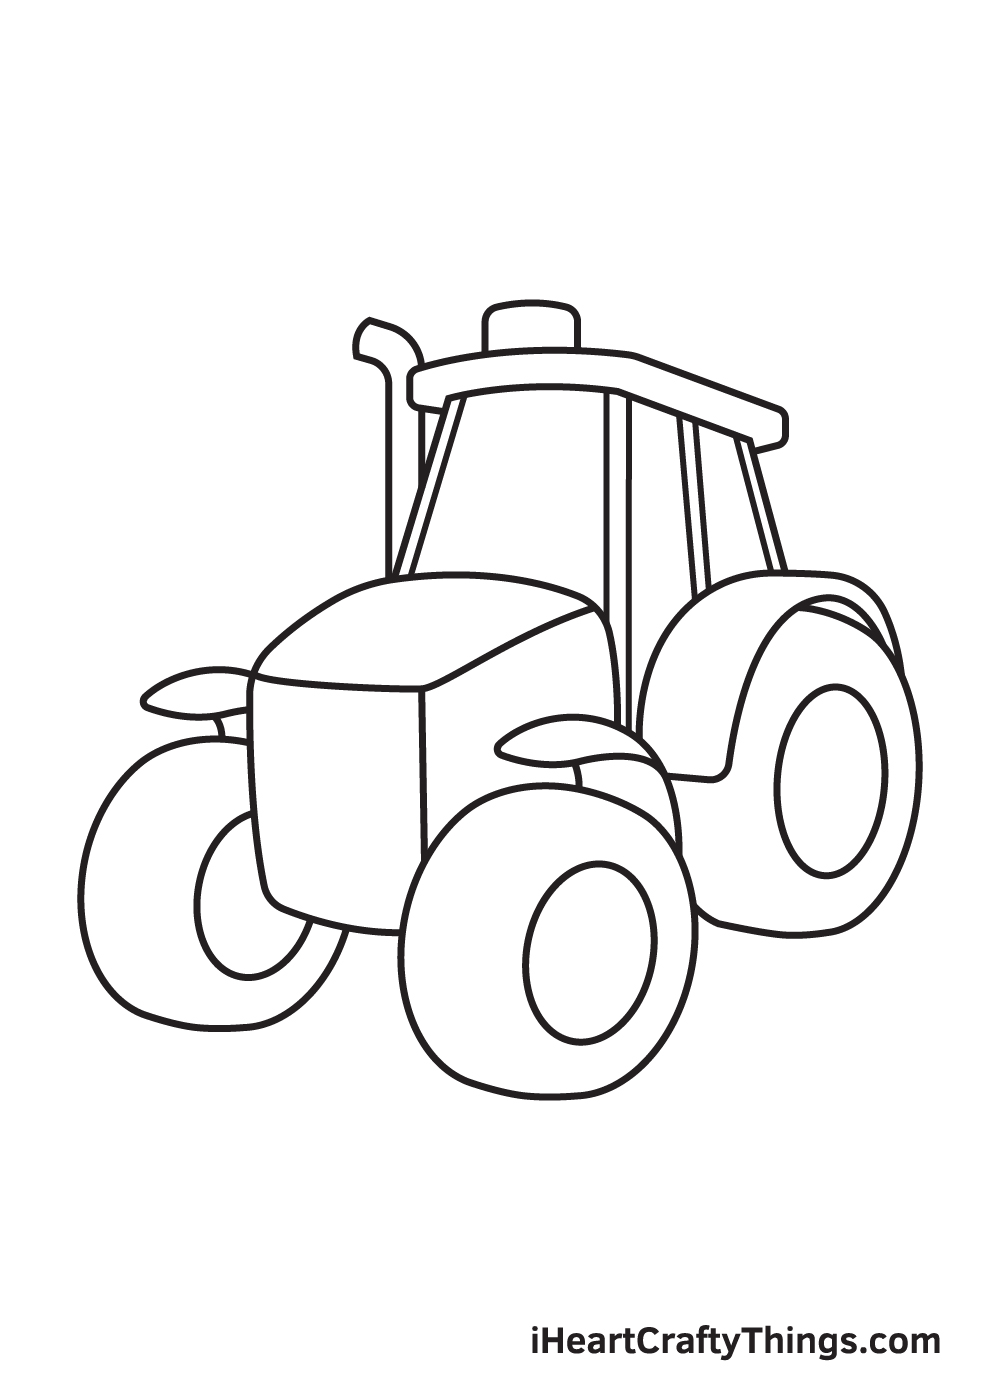 How to Draw a Tractor | A Step-by-Step Tutorial for Kids